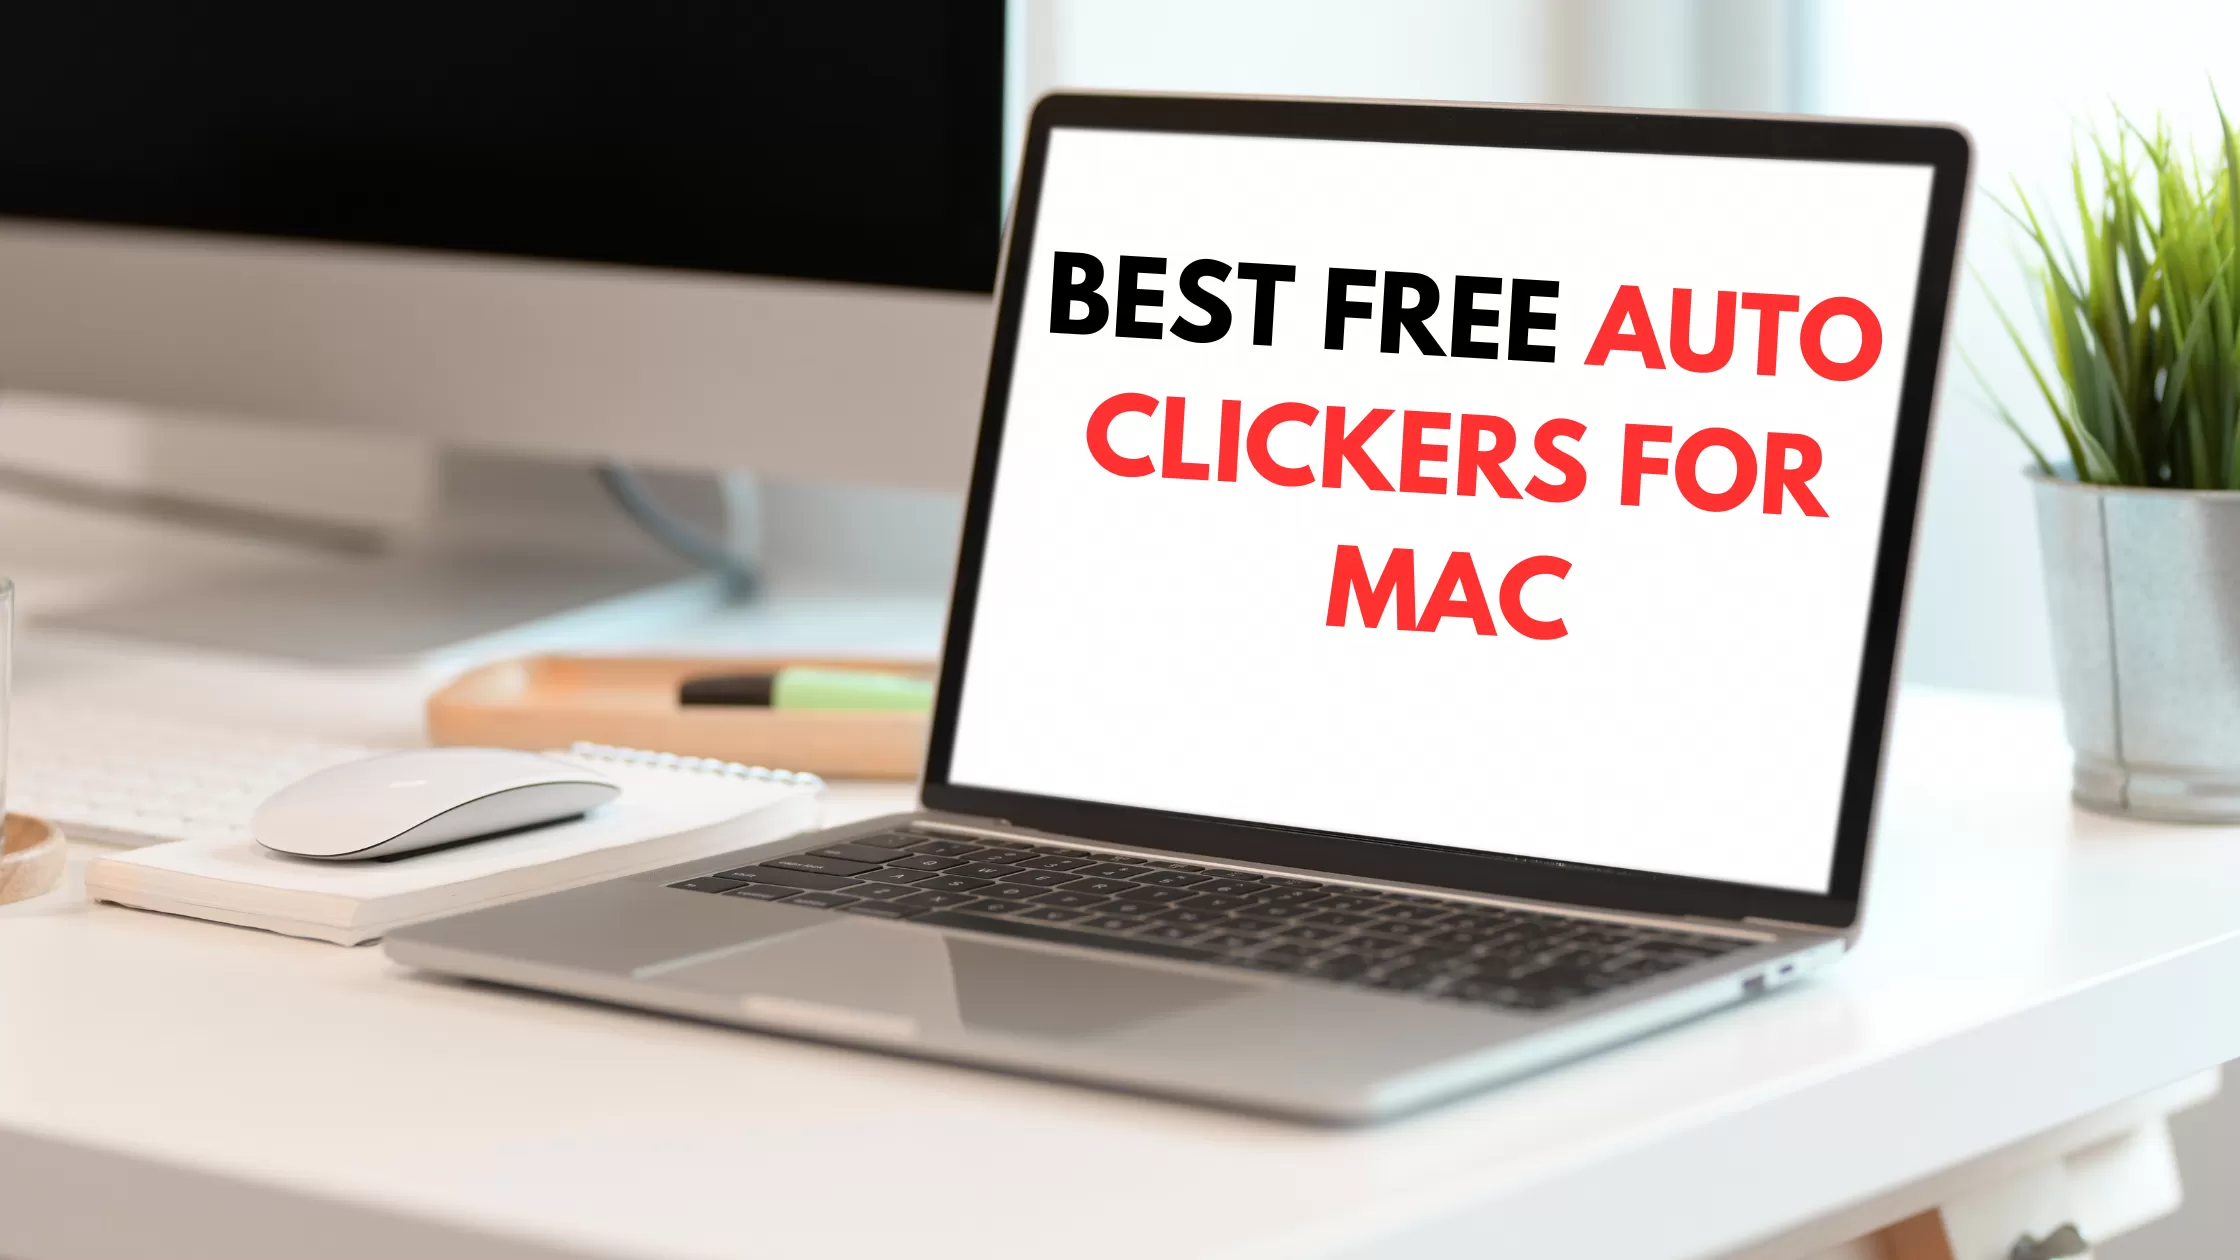 BEST FREE AUTO CLICKERS FOR MAC